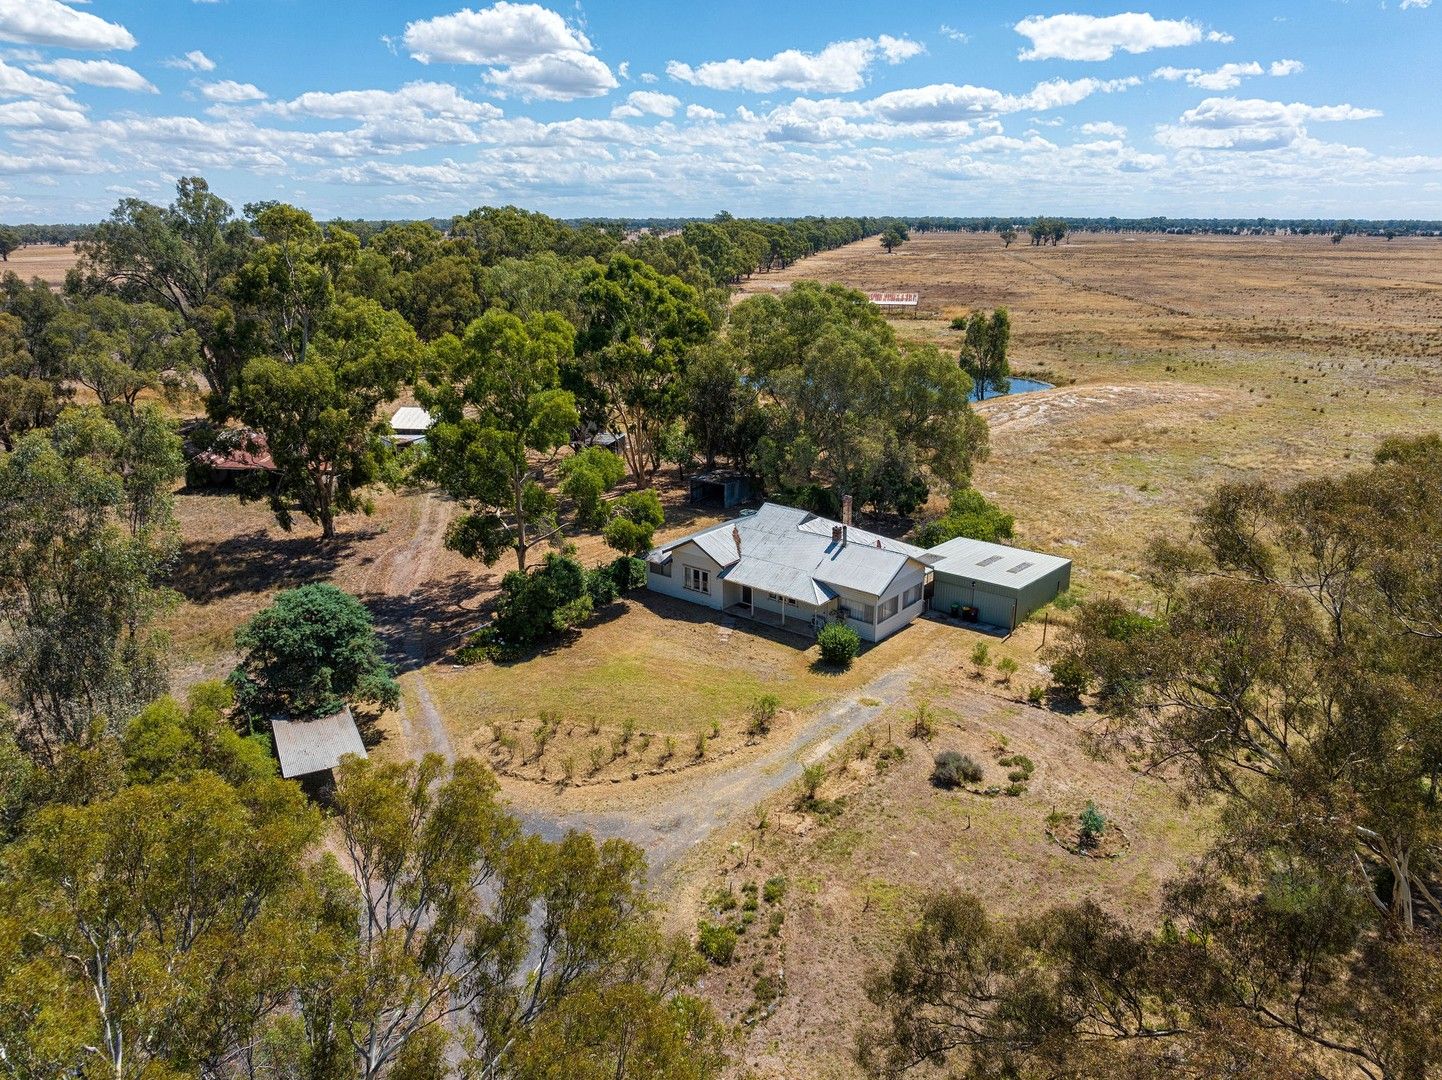 4 bedrooms Rural in 2098 Arcadia Two Chain Road EUROA VIC, 3666